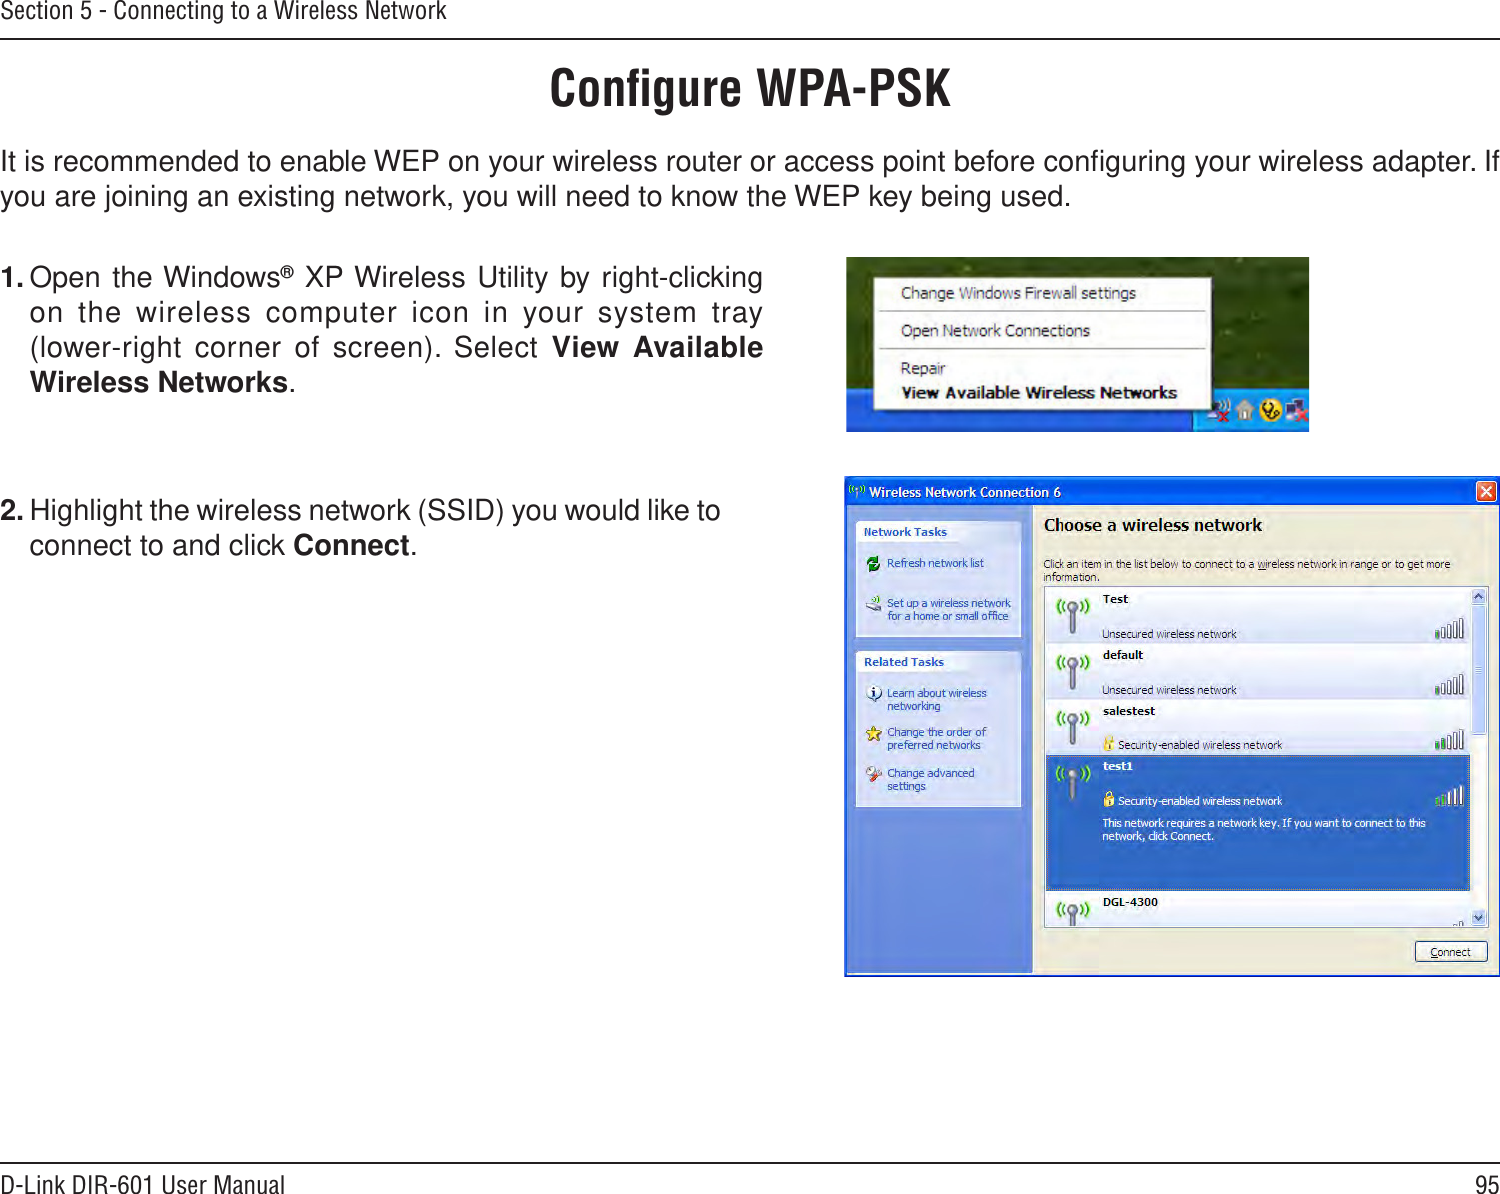 95D-Link DIR-601 User ManualSection 5 - Connecting to a Wireless NetworkConﬁgure WPA-PSKIt is recommended to enable WEP on your wireless router or access point before conﬁguring your wireless adapter. If you are joining an existing network, you will need to know the WEP key being used.2. Highlight the wireless network (SSID) you would like to connect to and click Connect.1. Open the Windows® XP Wireless Utility by right-clicking on the wireless computer icon  in your system tray  (lower-right  corner of  screen).  Select  View  Available Wireless Networks. 